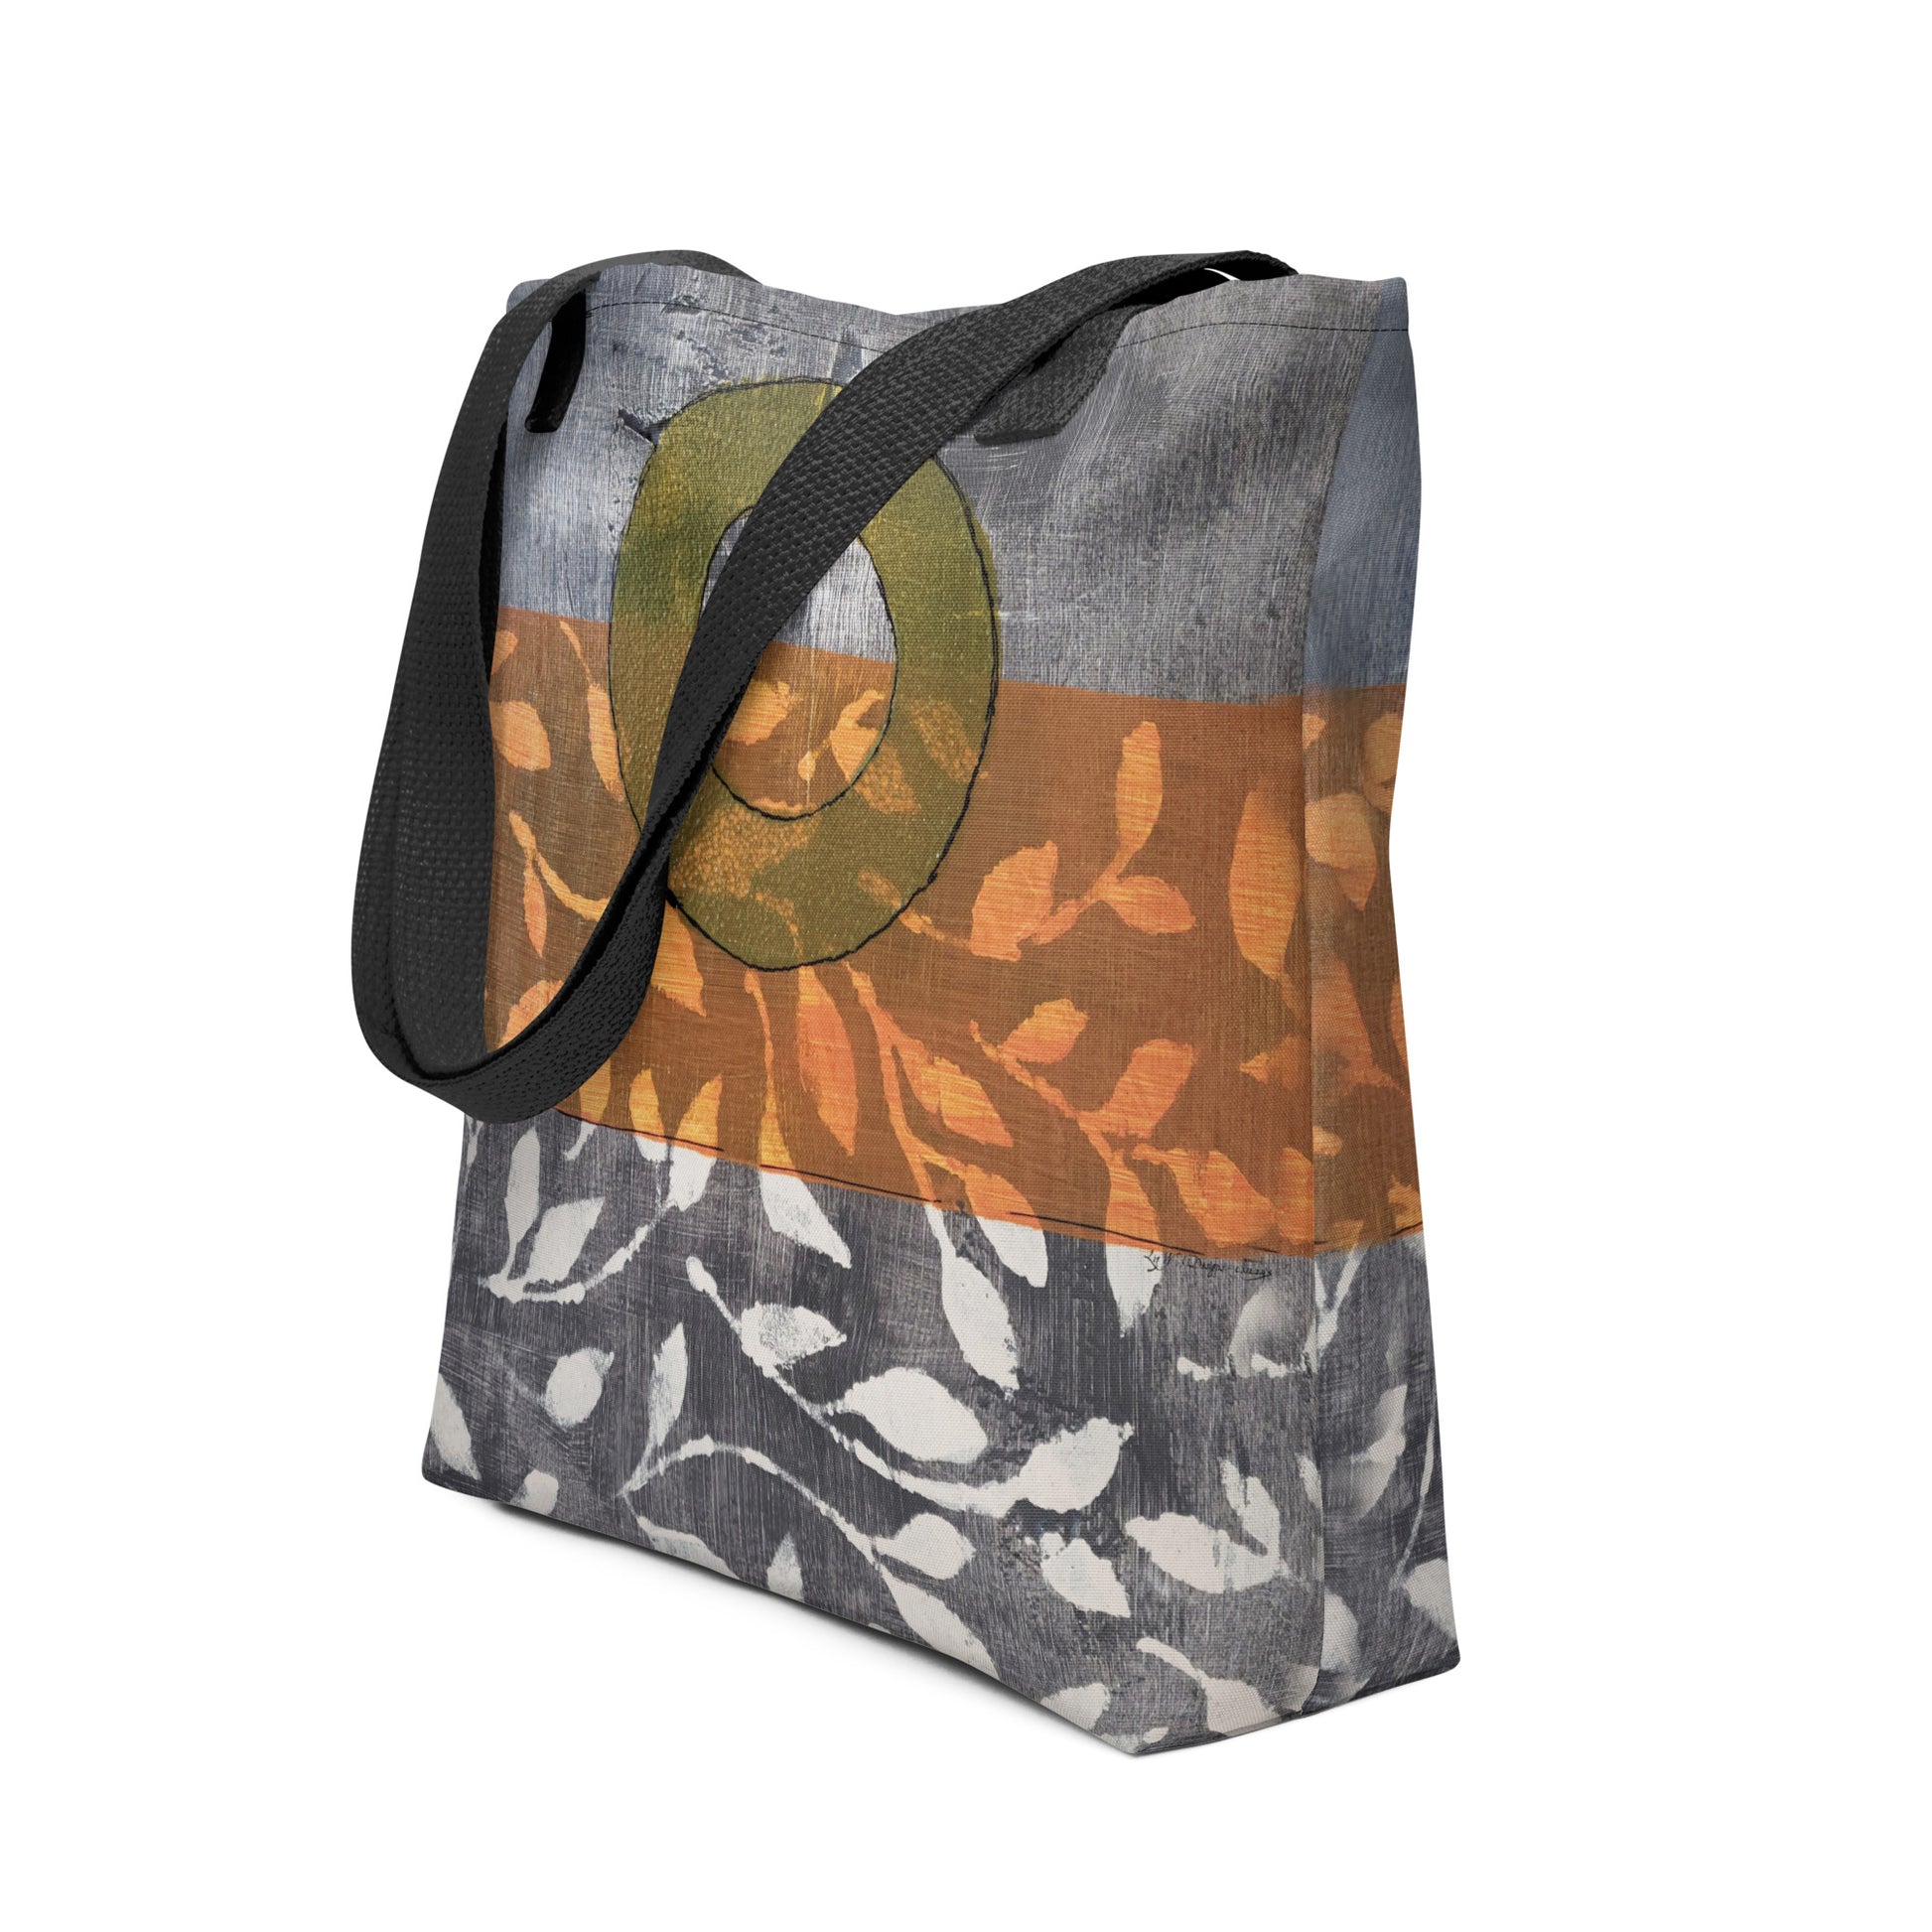 Tote bag of original art.  Avocado green circle on gray and light burnt orange background with off-white leaf design.